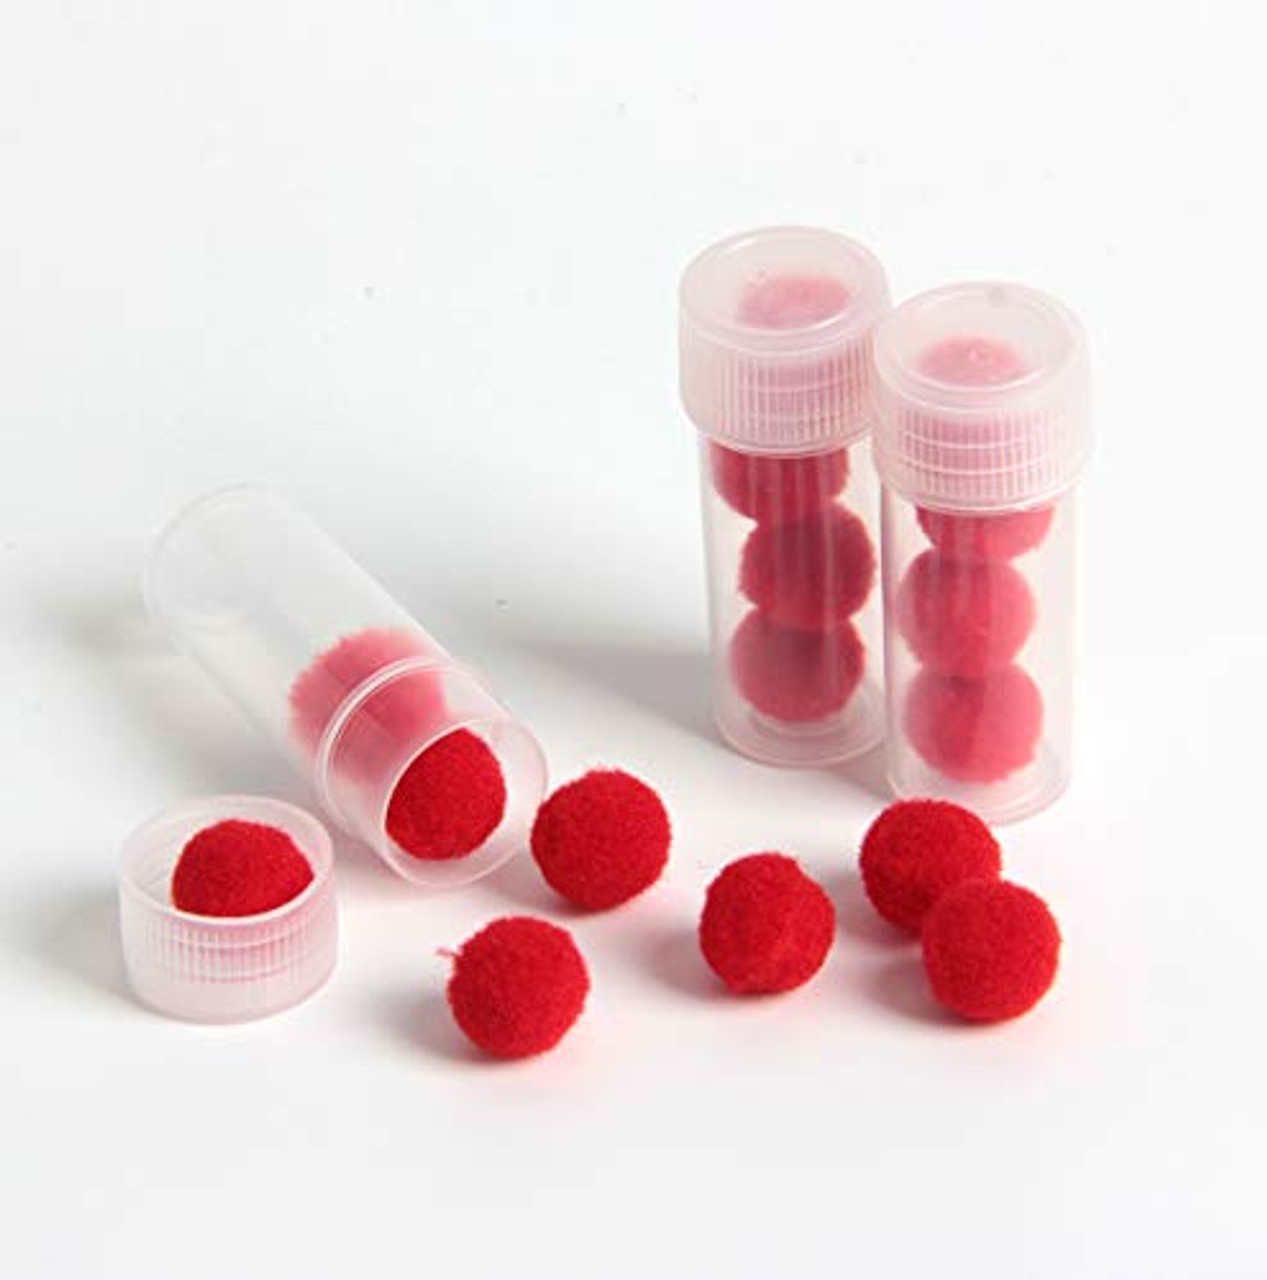 SBYURE 120 Pieces 5 ML Plastic Sample Bottles Vial Storage Mini Clear  Storage Case with Lid Vial Storage Container Test Tube for Small Items